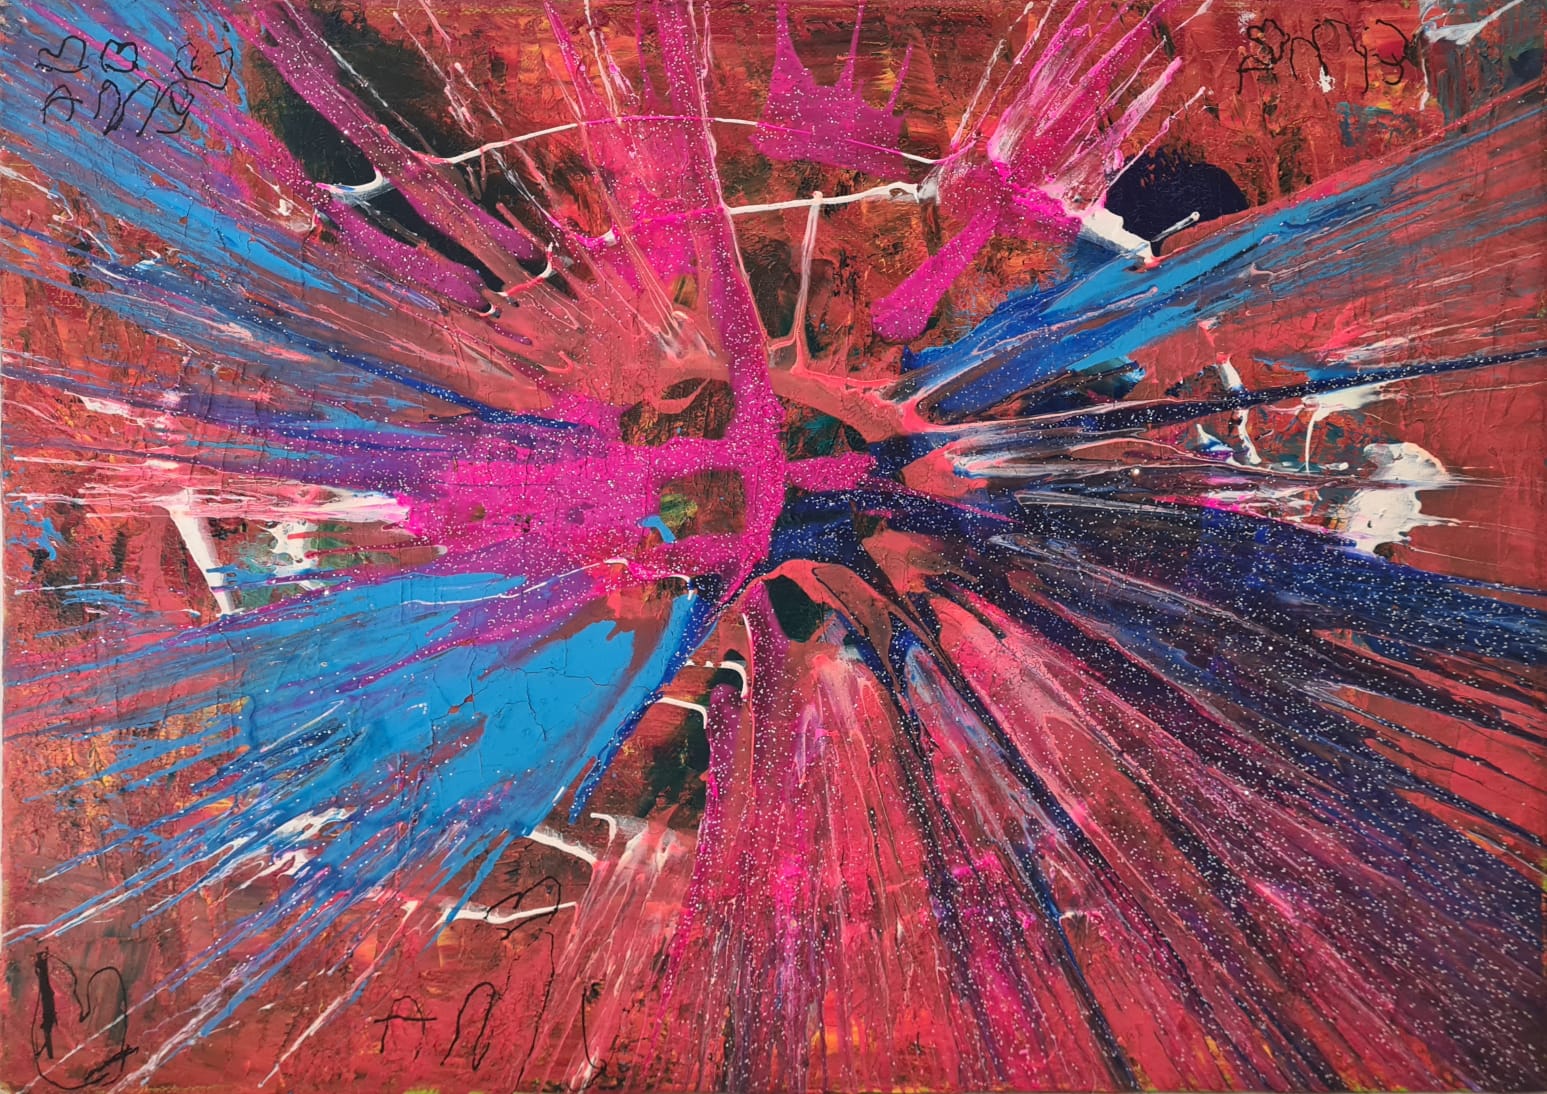 'Splash of colour' by Amy (4) from Meath